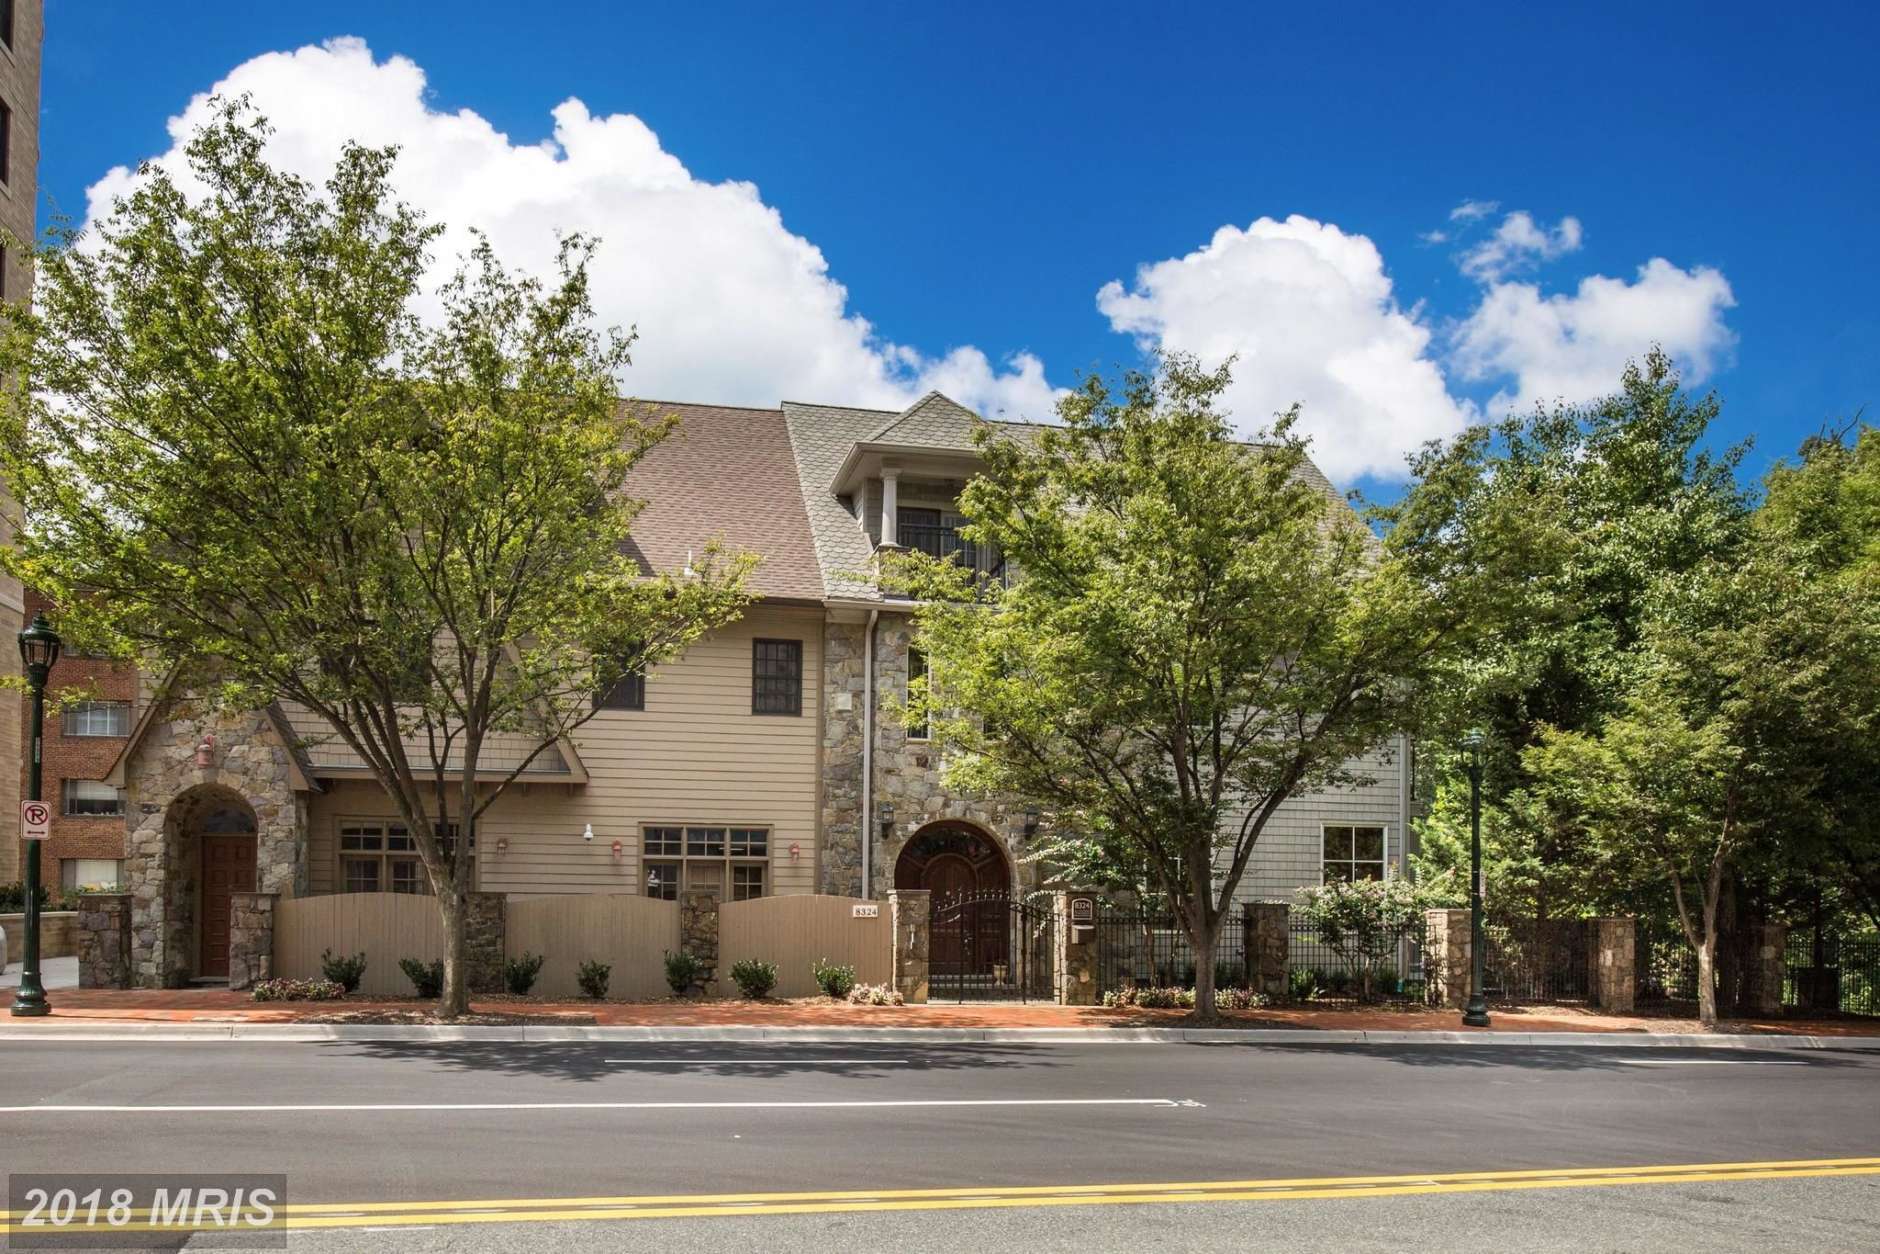 5. $3.3 million
8324 Woodmont Avenue  
#1 
Bethesda, Maryland 

This duplex has seven full baths, 2 half-baths and seven bedrooms. (Courtesy Bright MLS)

